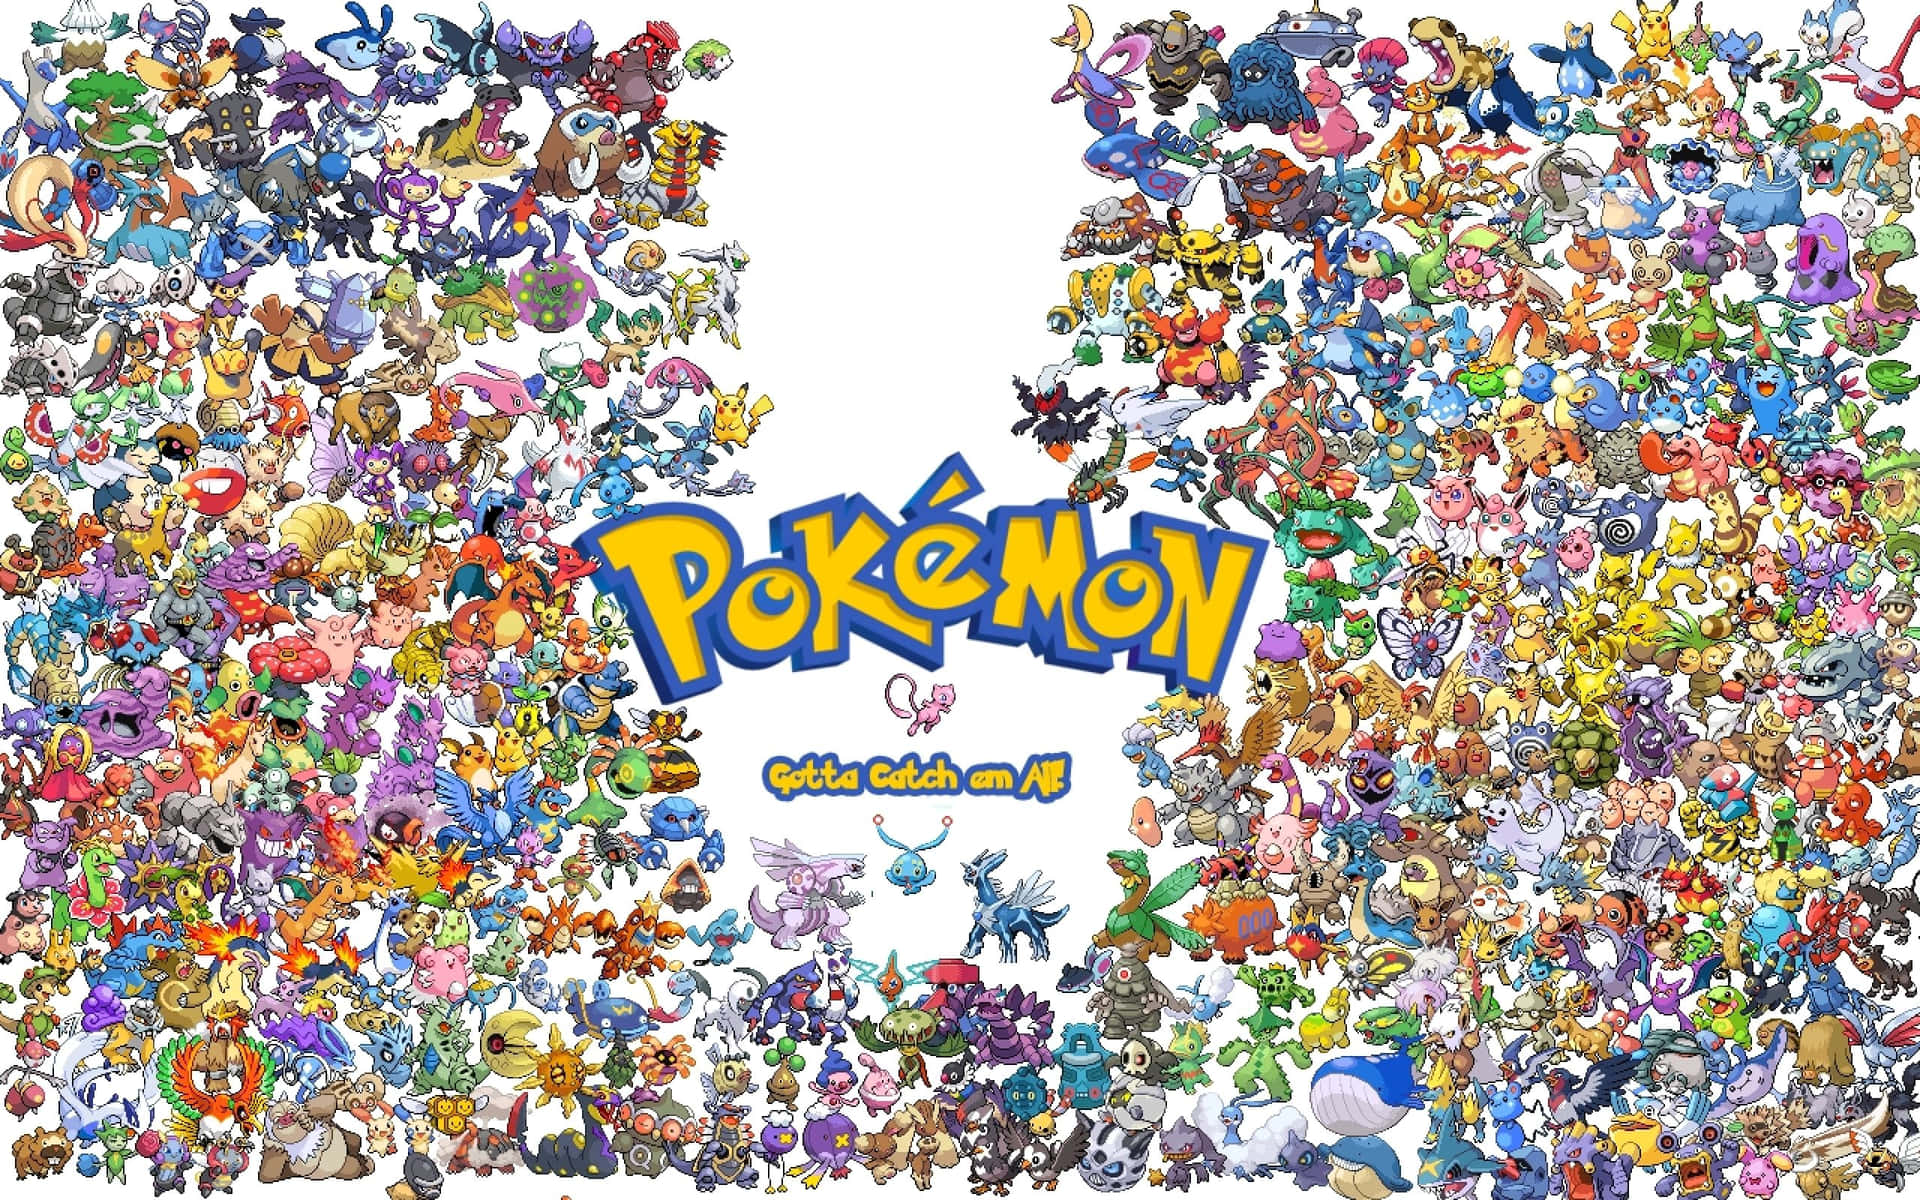 All your favorite Pokémon in one place!